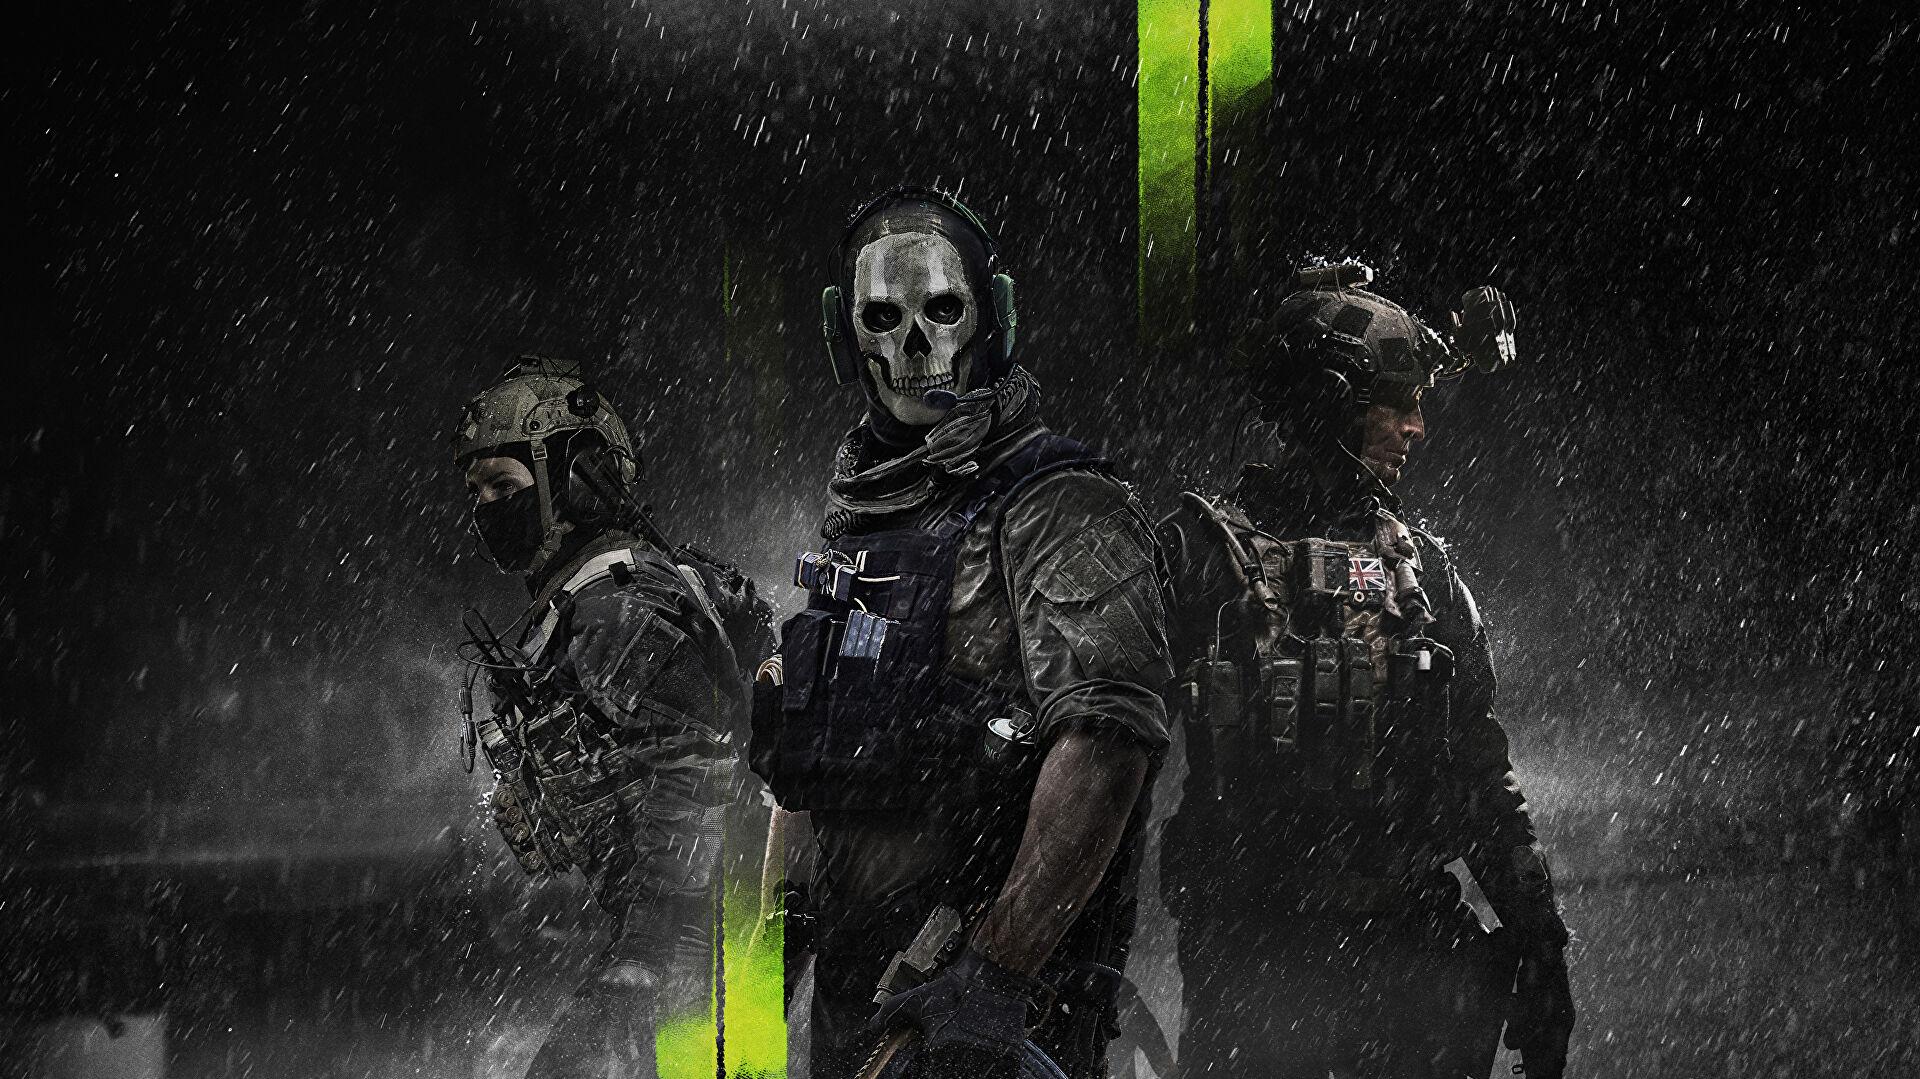 Vg247 Watch Call Of Duty Next Here Today For Our First Look At